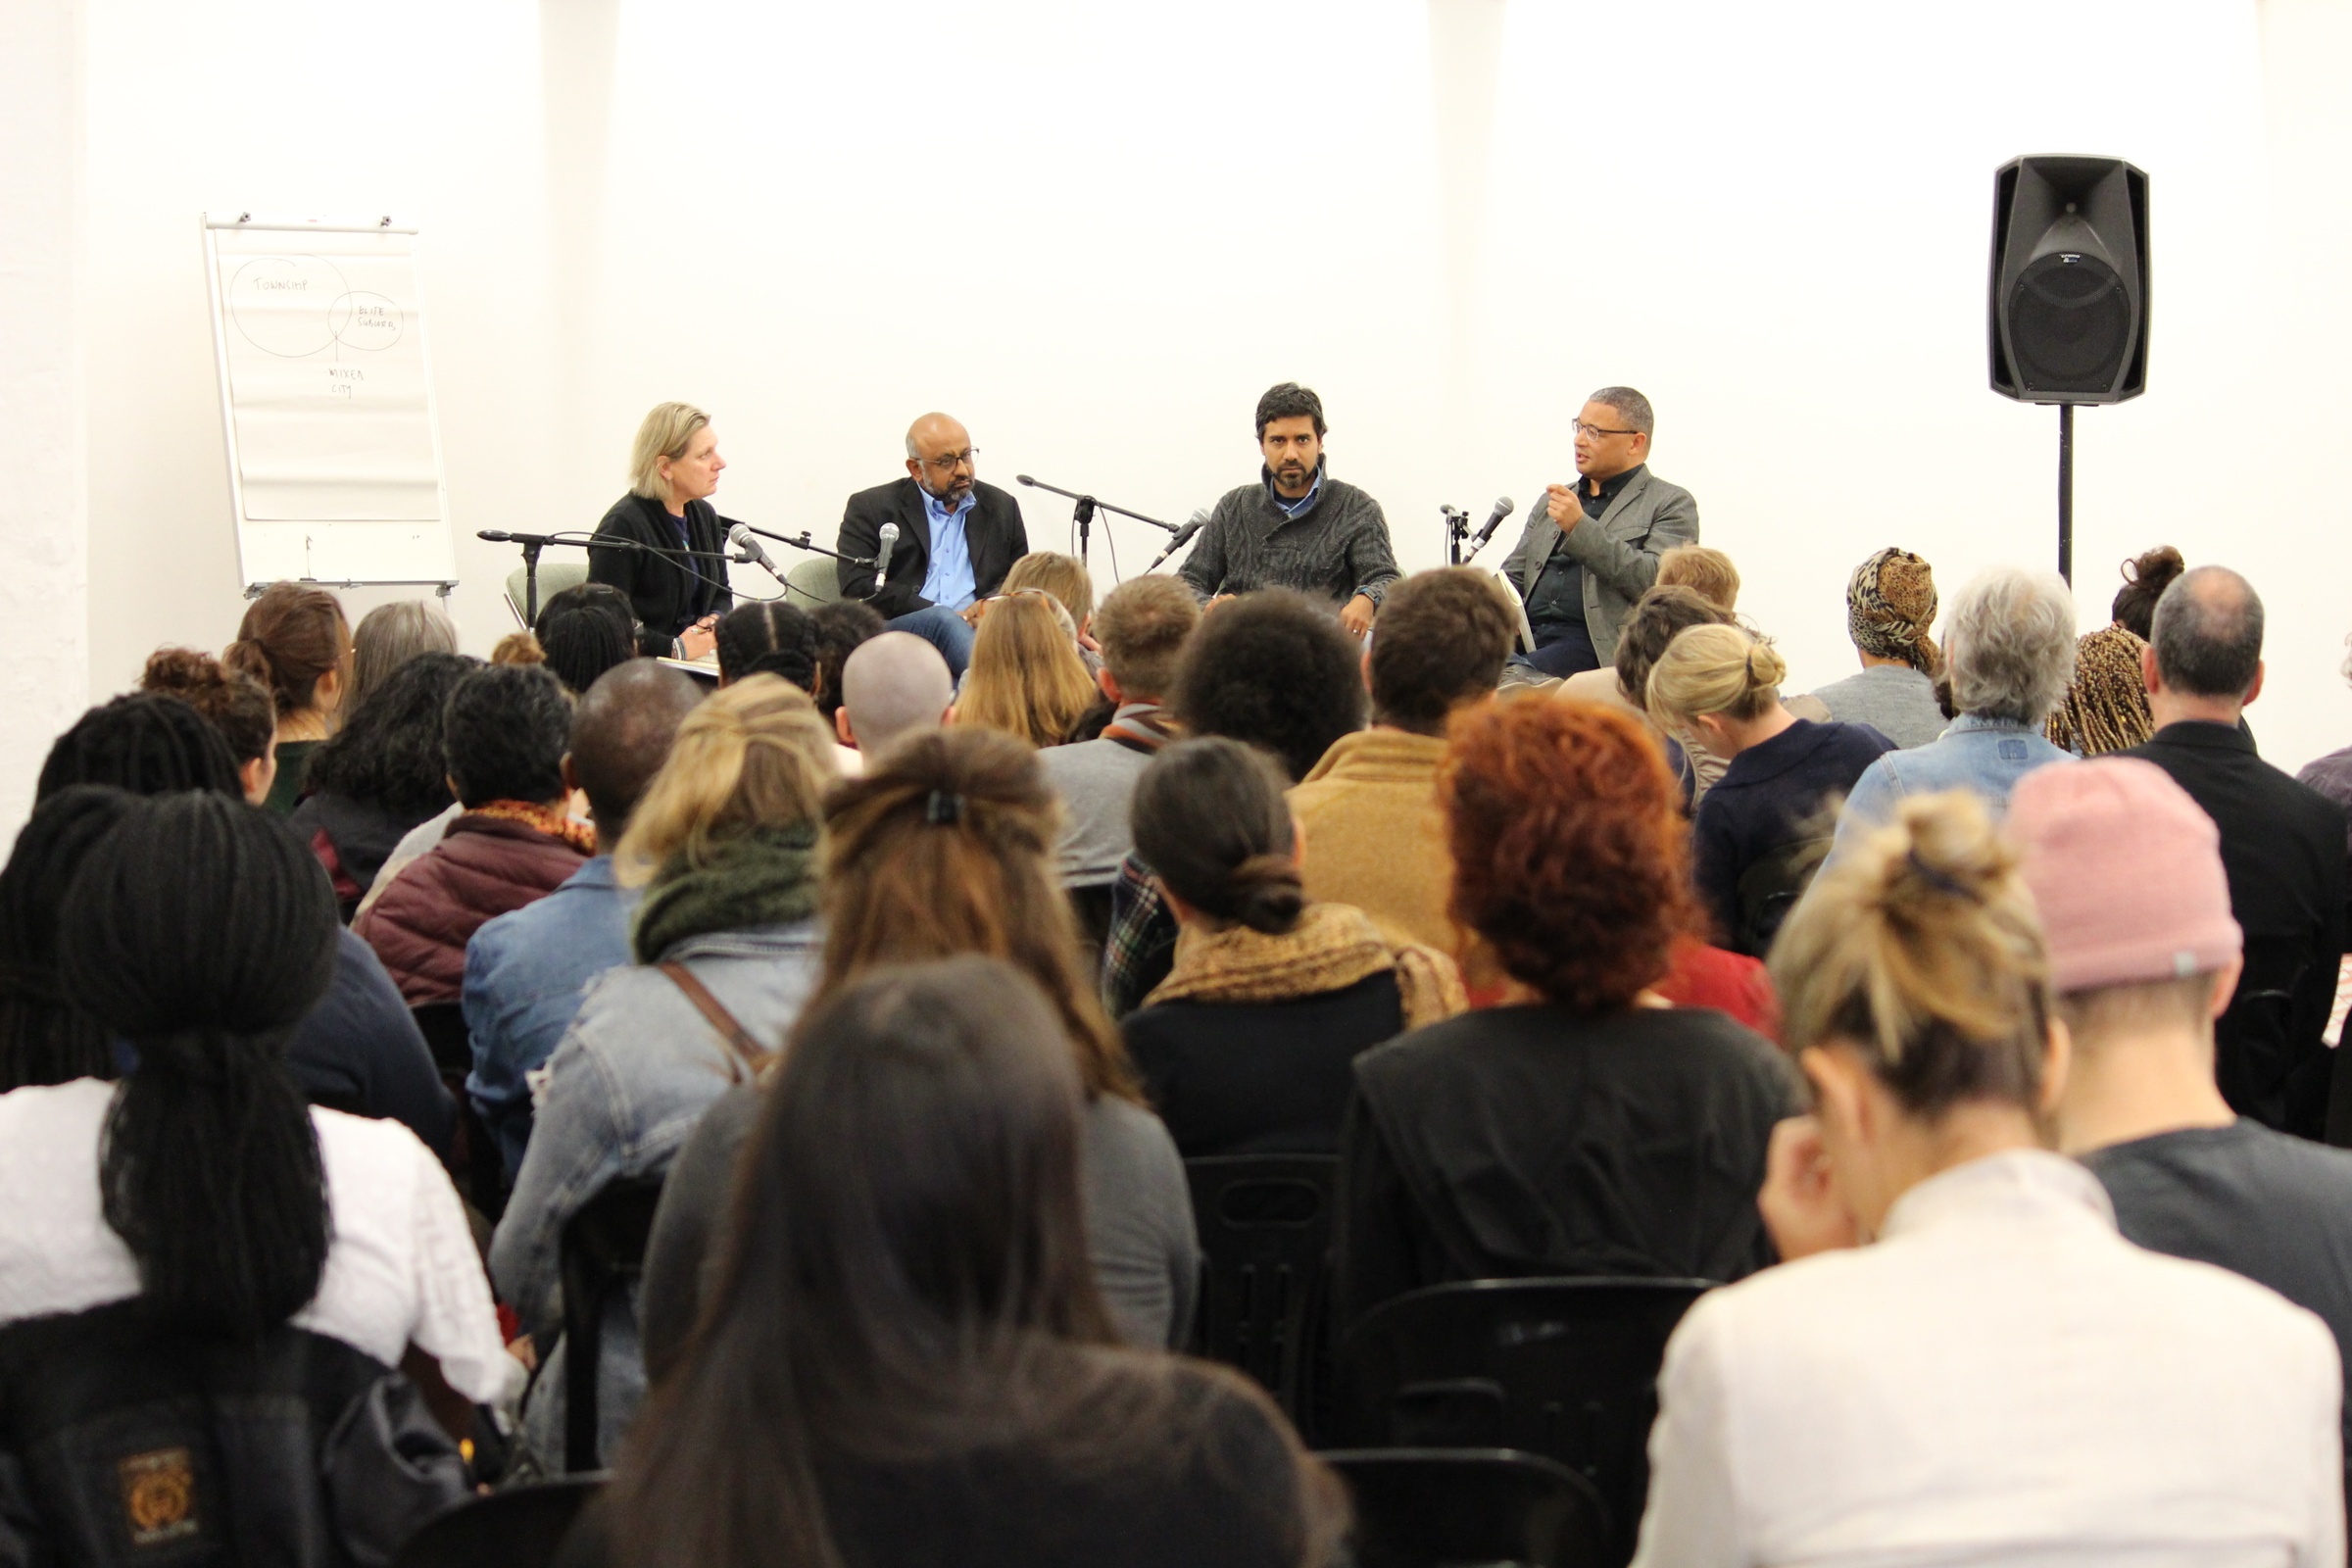 Event photograph from the 2017 rendition of the Open Book literary festival on A4’s ground floor. At the front, attendees are seated. At the back, Pippa Green, Premesh Lalu, Adi Kumar and Edgar Pieterse are seated with standing microphones.
